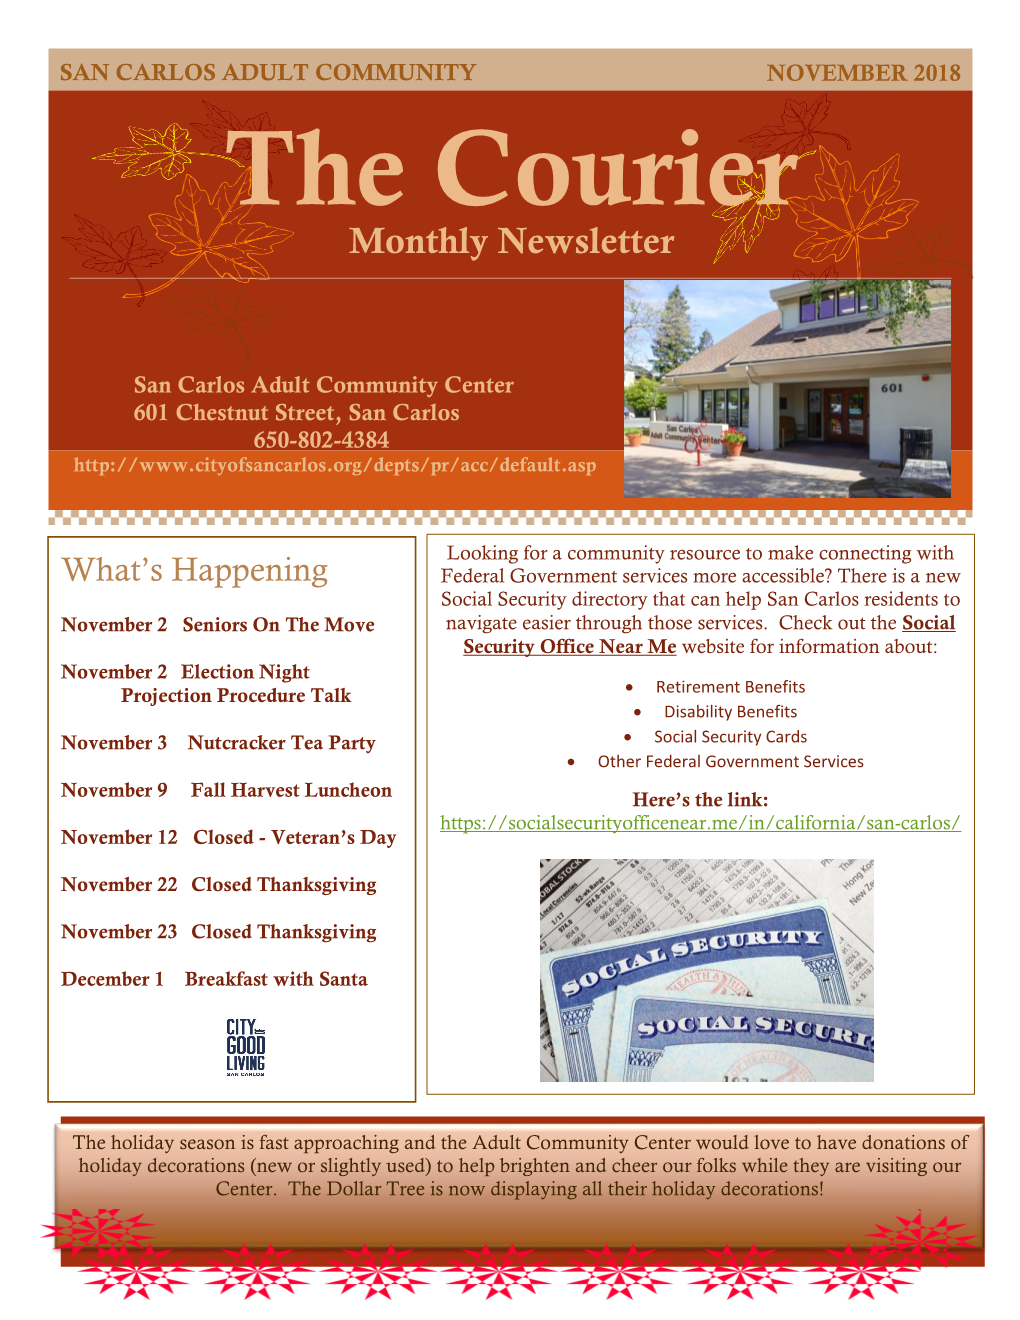 The Courier Monthly Newsletter